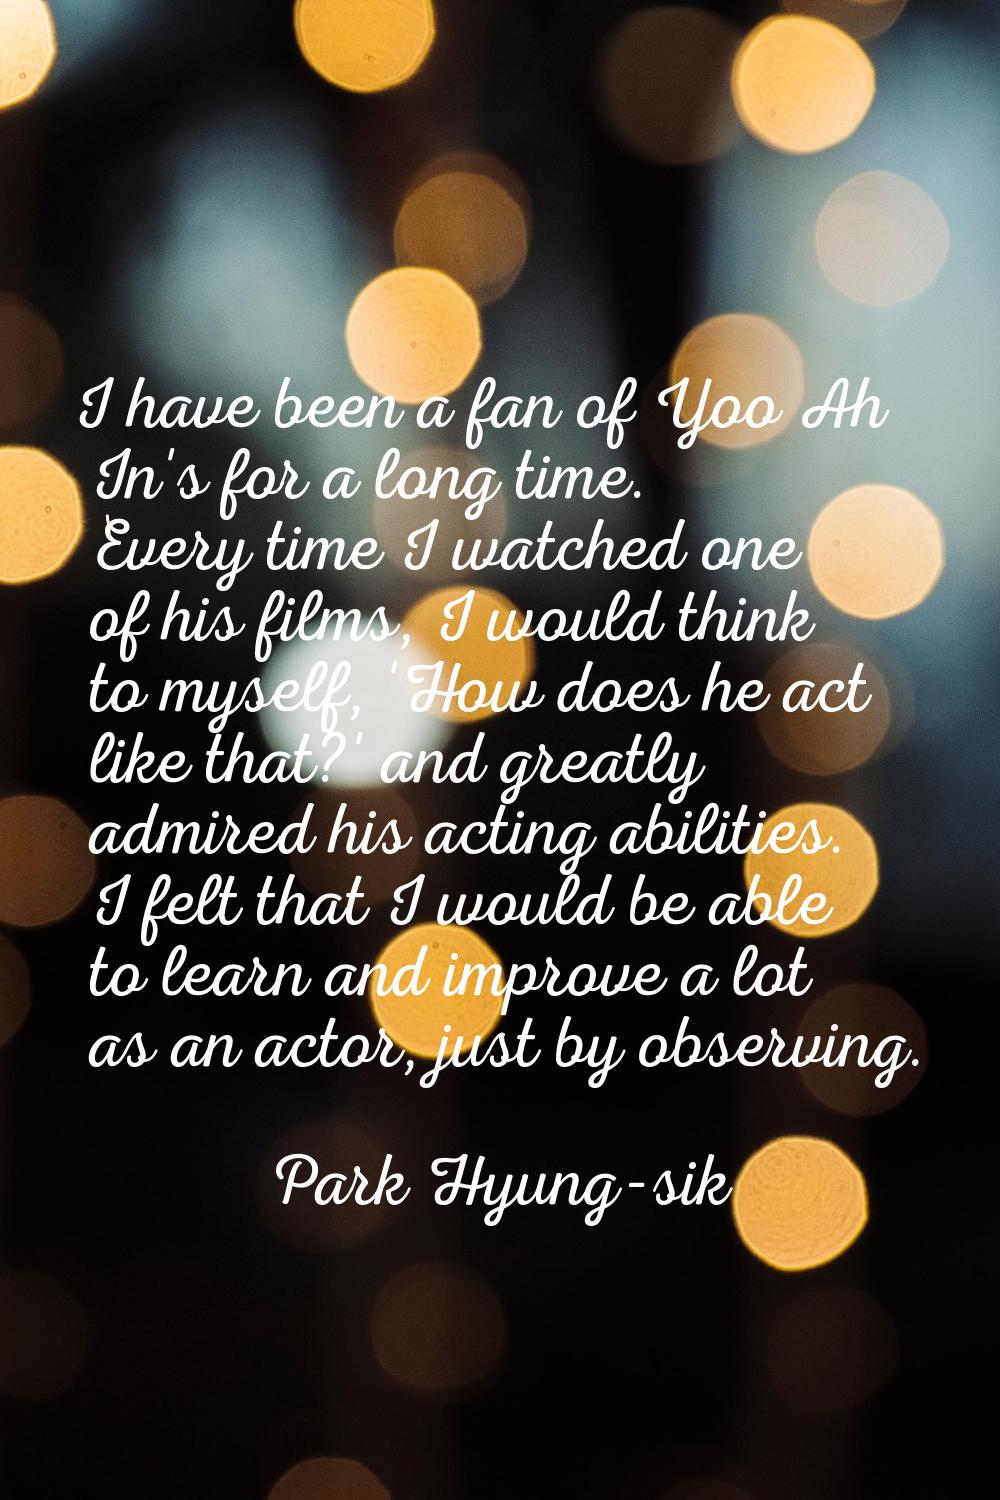 I have been a fan of Yoo Ah In's for a long time. Every time I watched one of his films, I would th